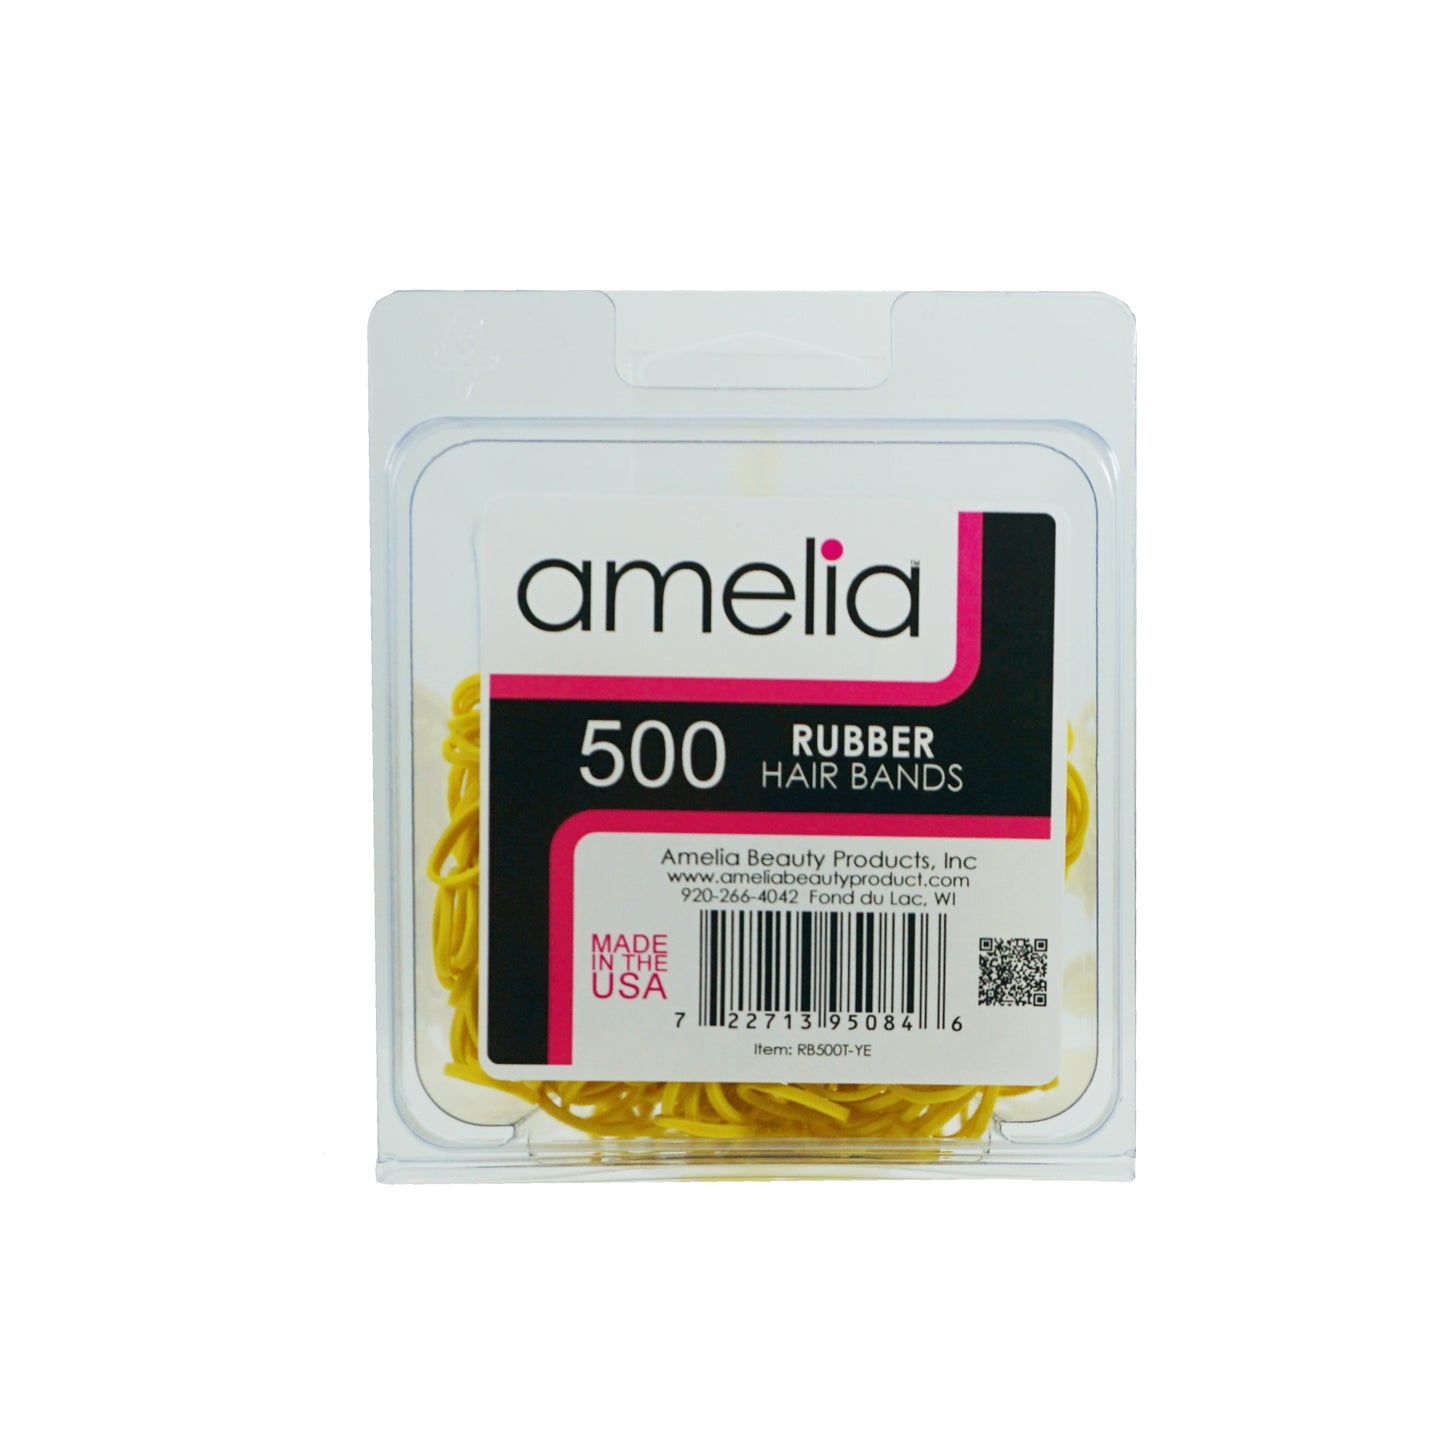 Amelia Beauty | 1/2in, Yellow, Elastic Rubber Band Pony Tail Holders | Made in USA, Ideal for Ponytails, Braids, Twists, Dreadlocks, Styling Accessories for Women, Men and Girls | 500 Pack